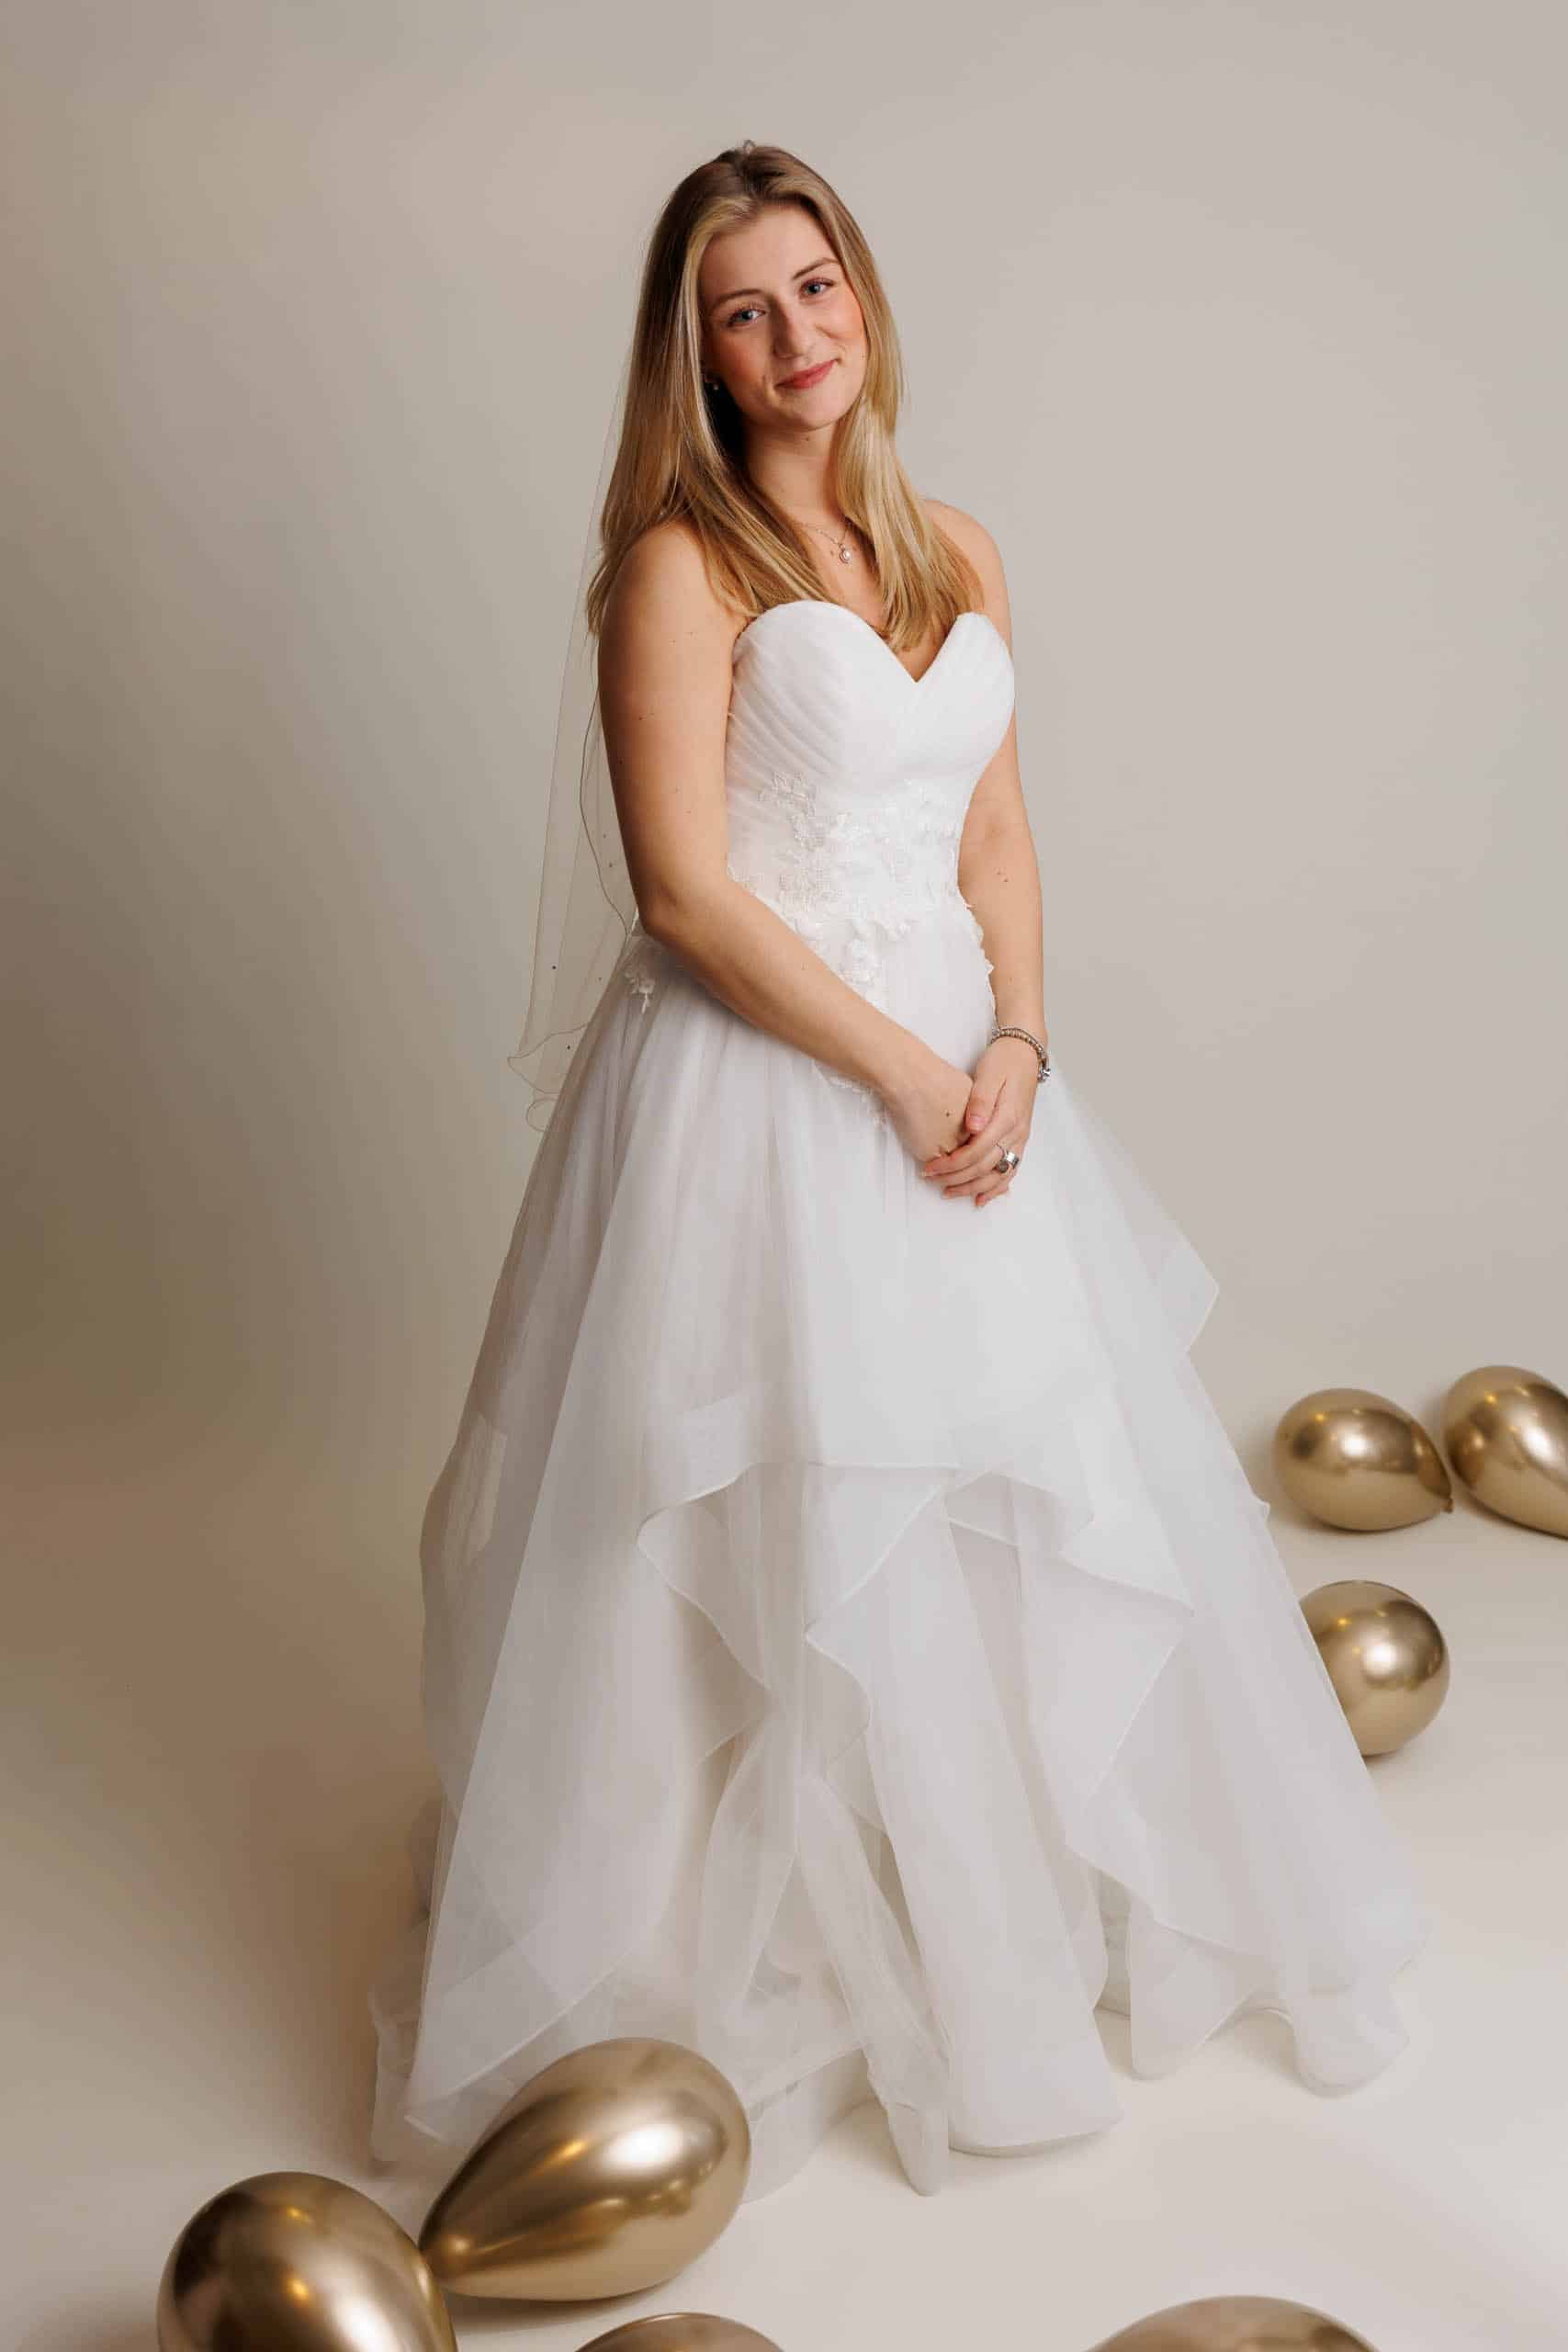 A bride in a wedding dress poses in front of balloons while trying on wedding dresses for fun.